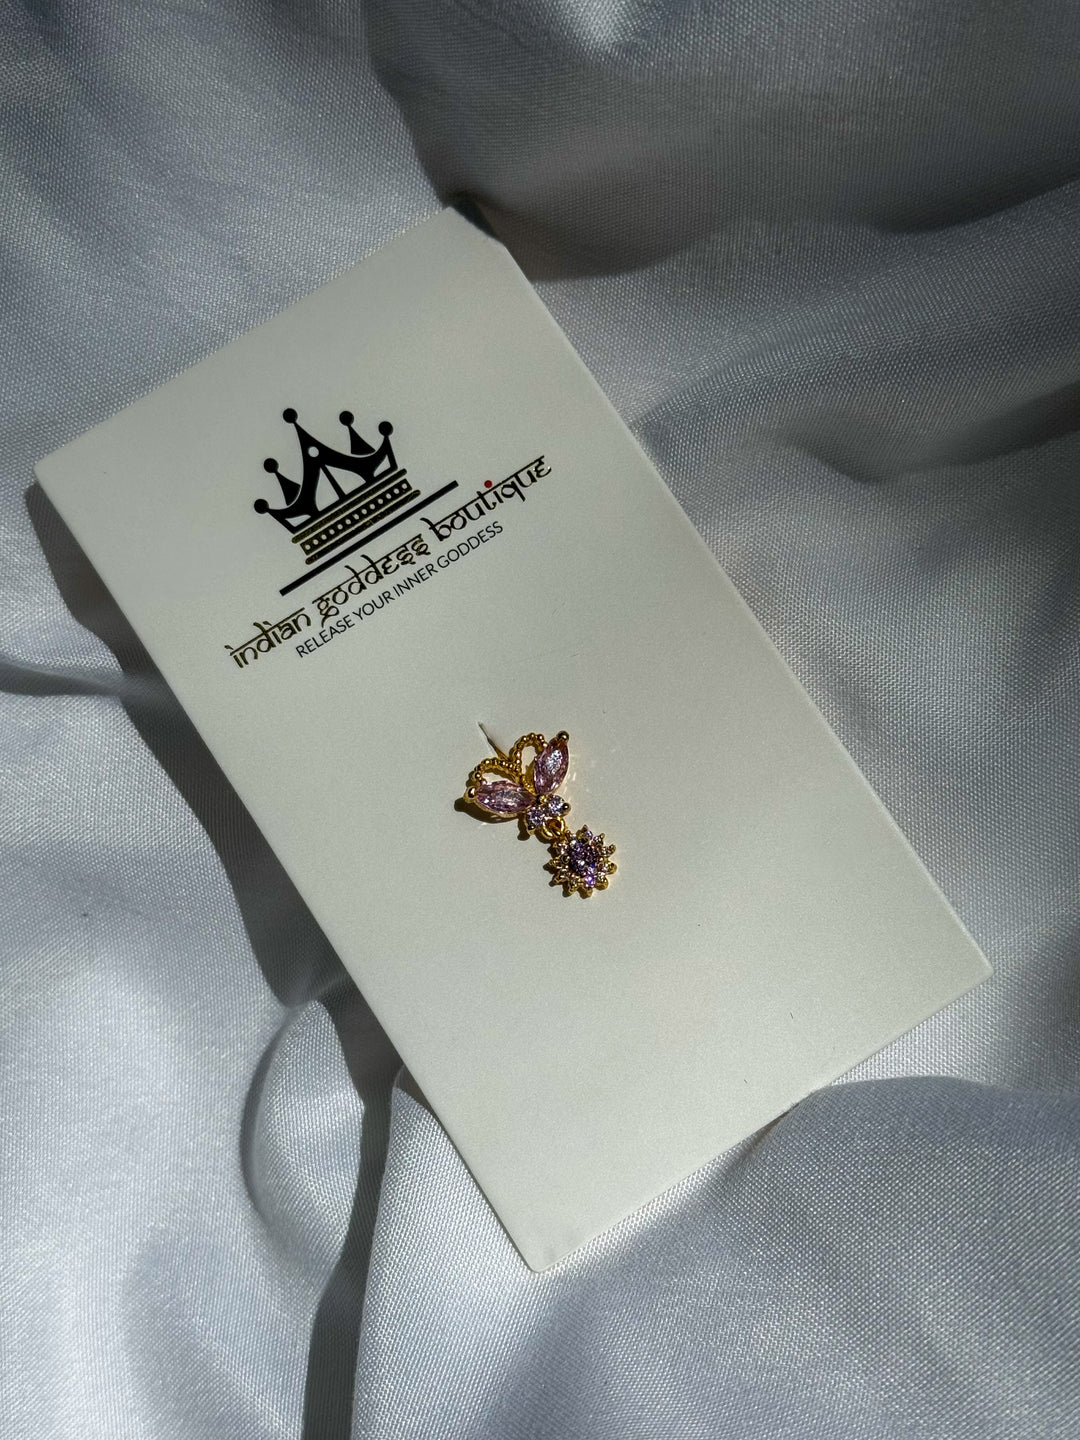 Princess Butterfly Nose Ring